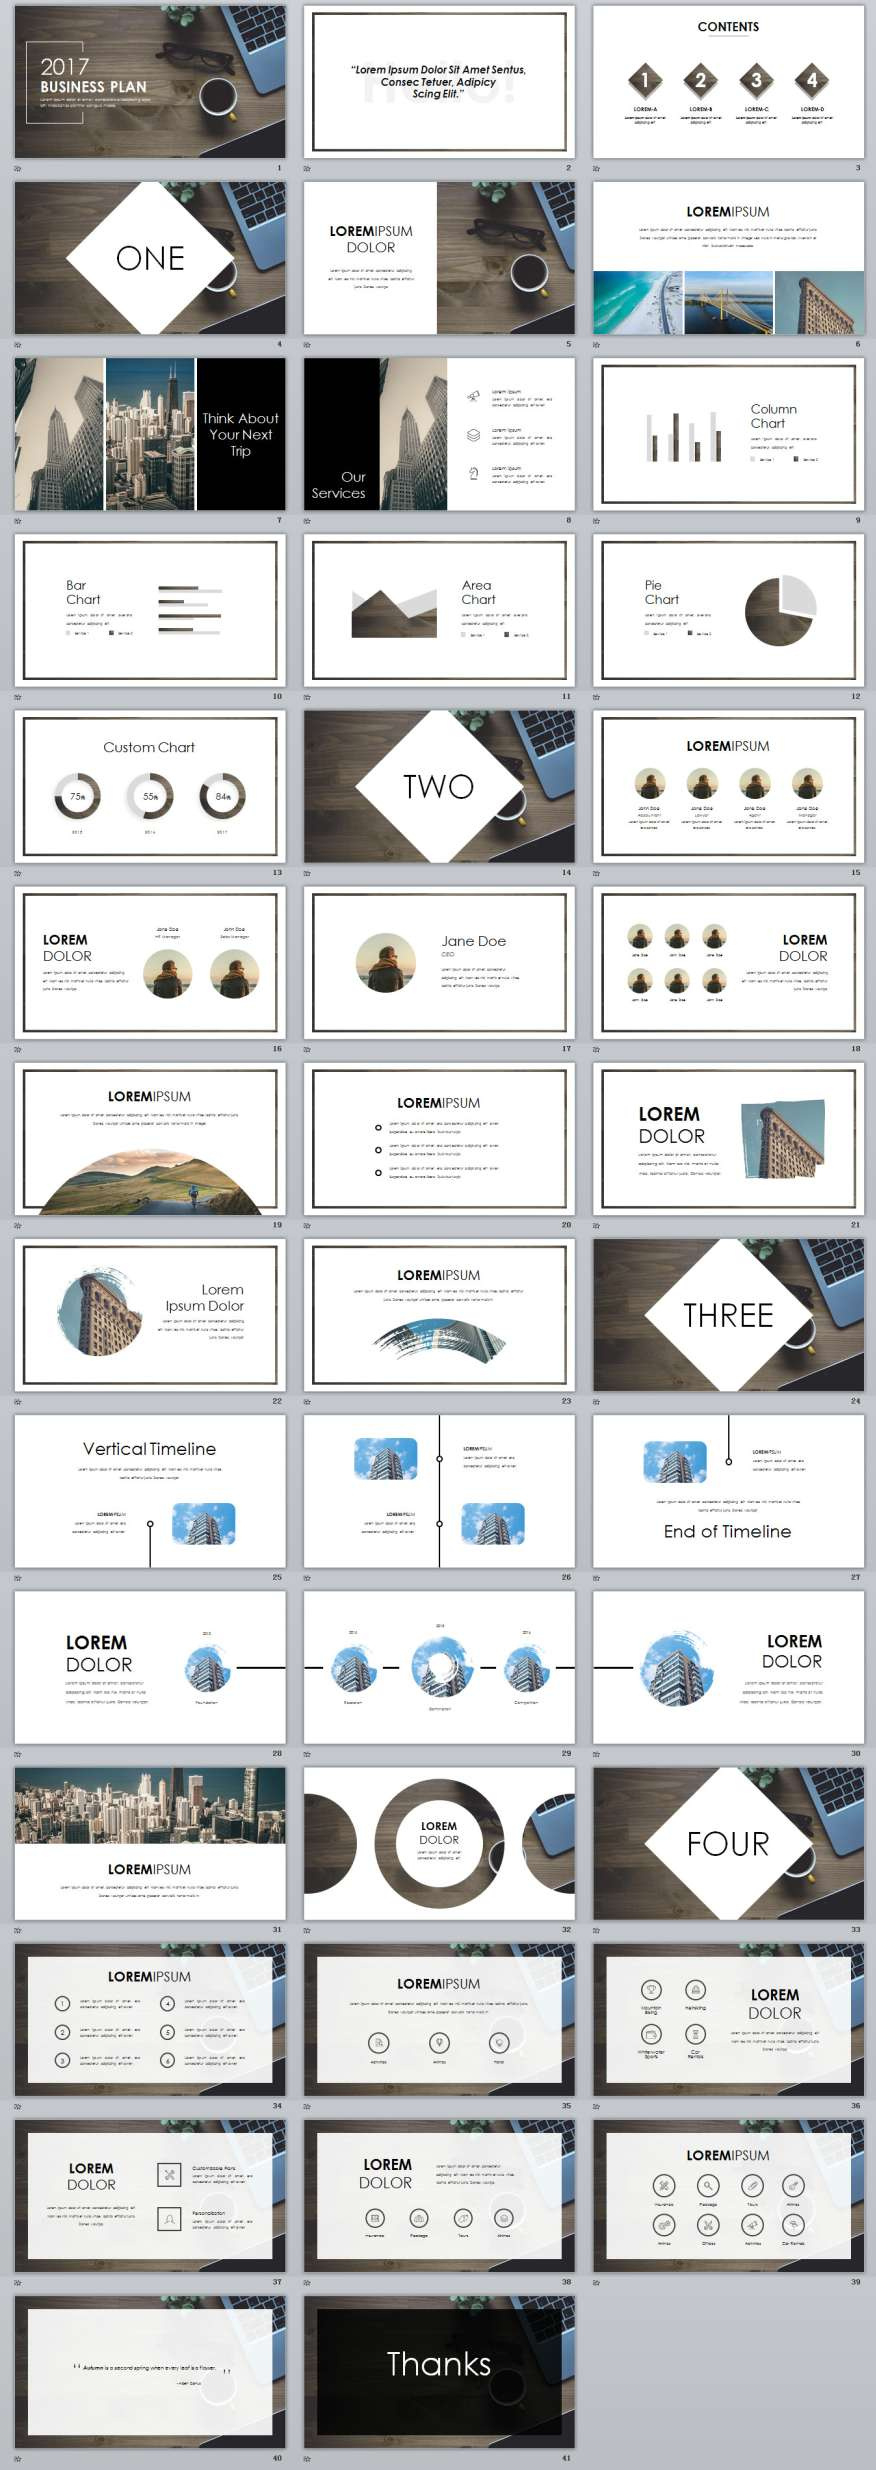 40 White Business Plan Powerpoint Template The Highest Within Business Plan Powerpoint Template Free Download